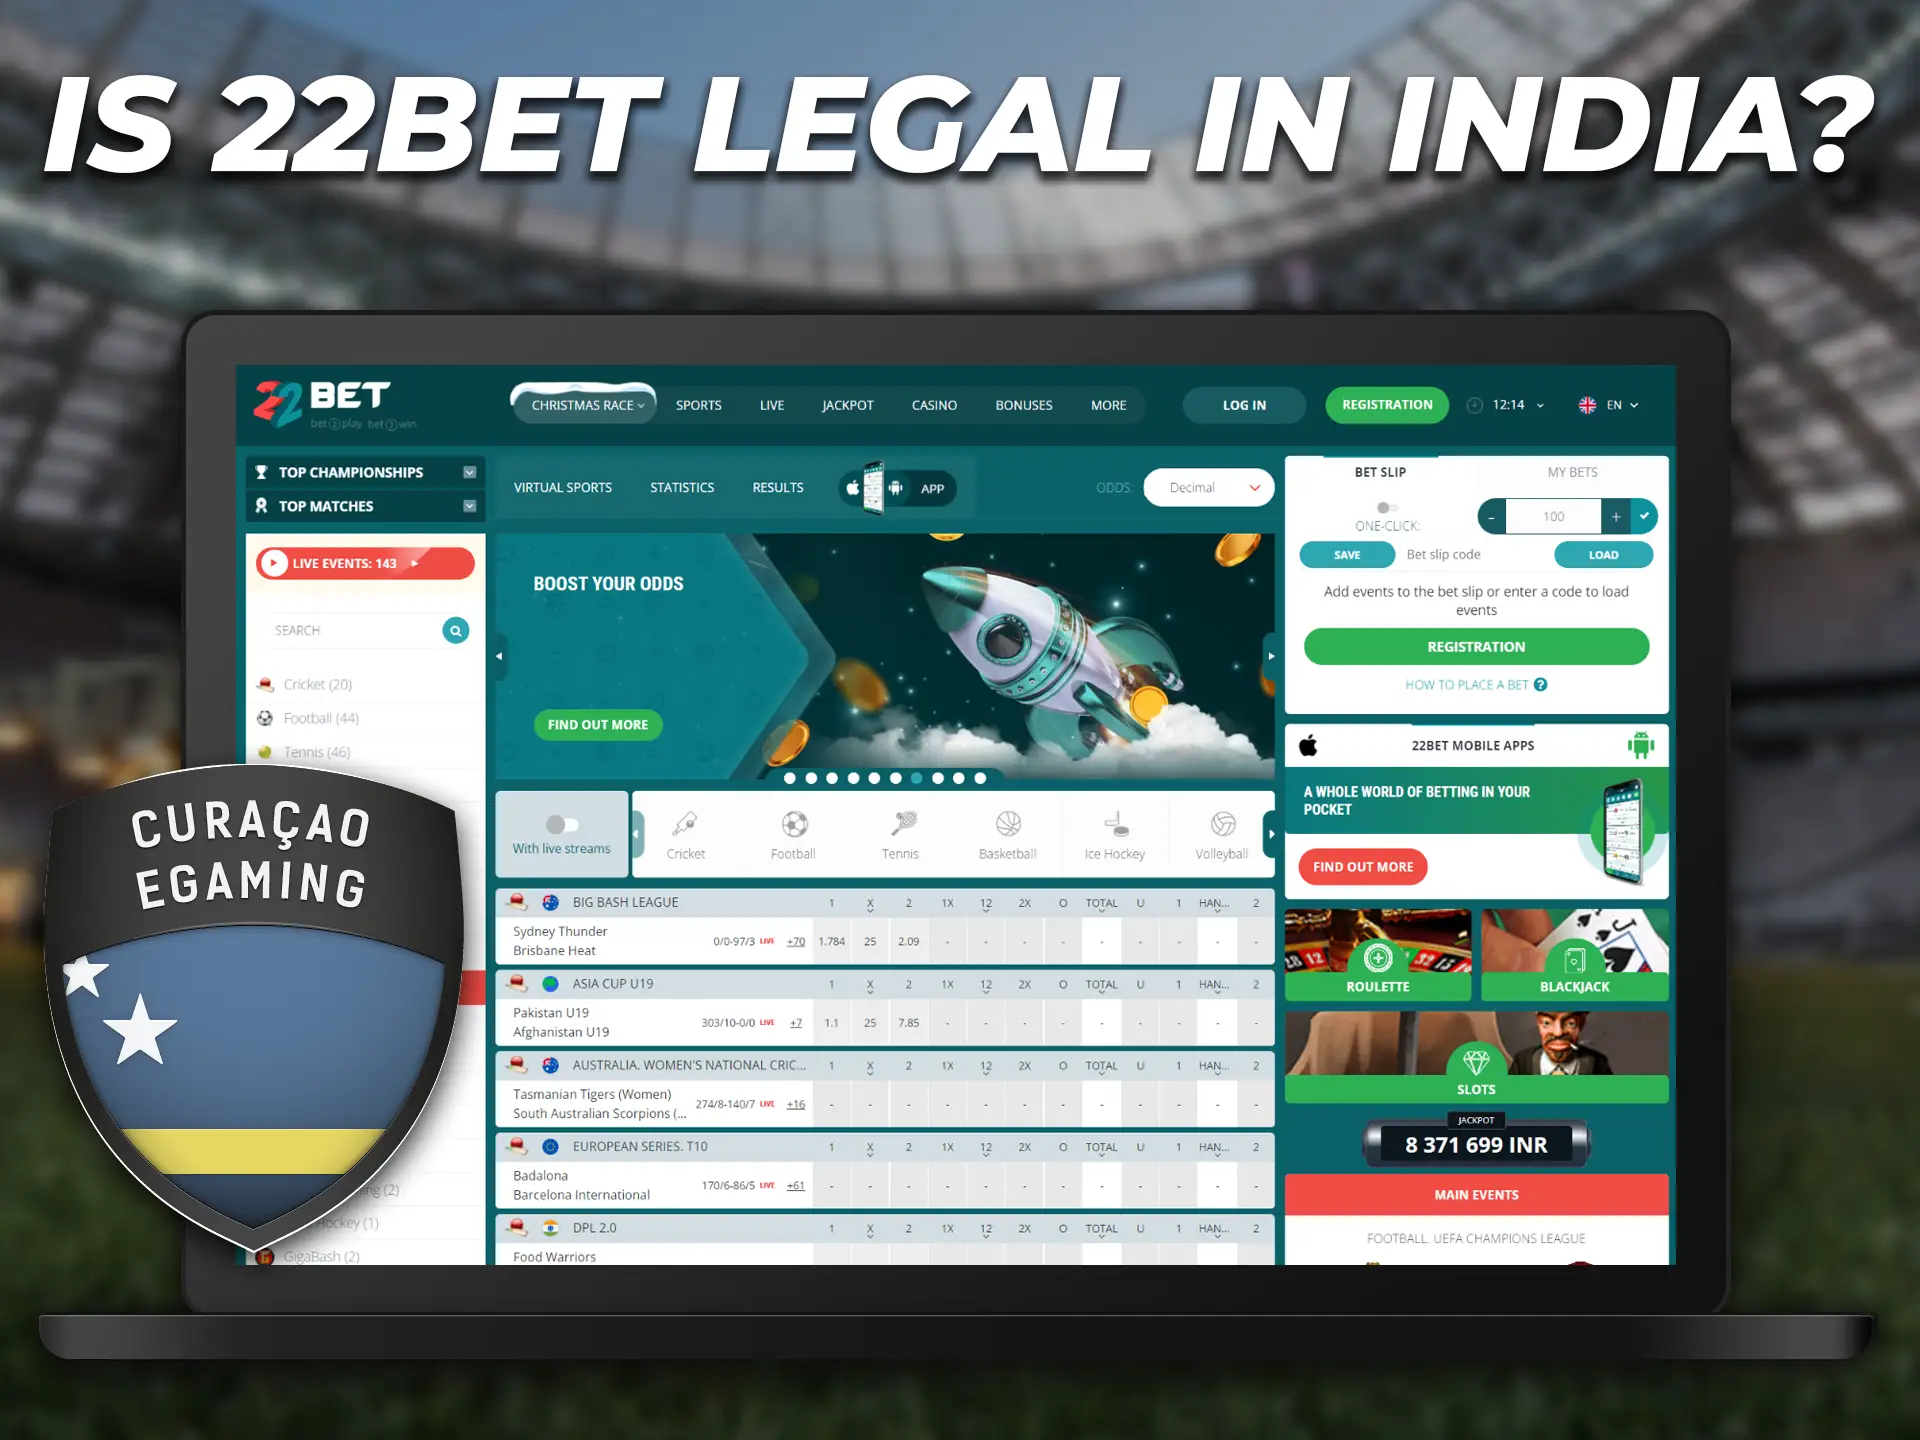 The 22Bet website is legal in India and operates under an official Curacao license.